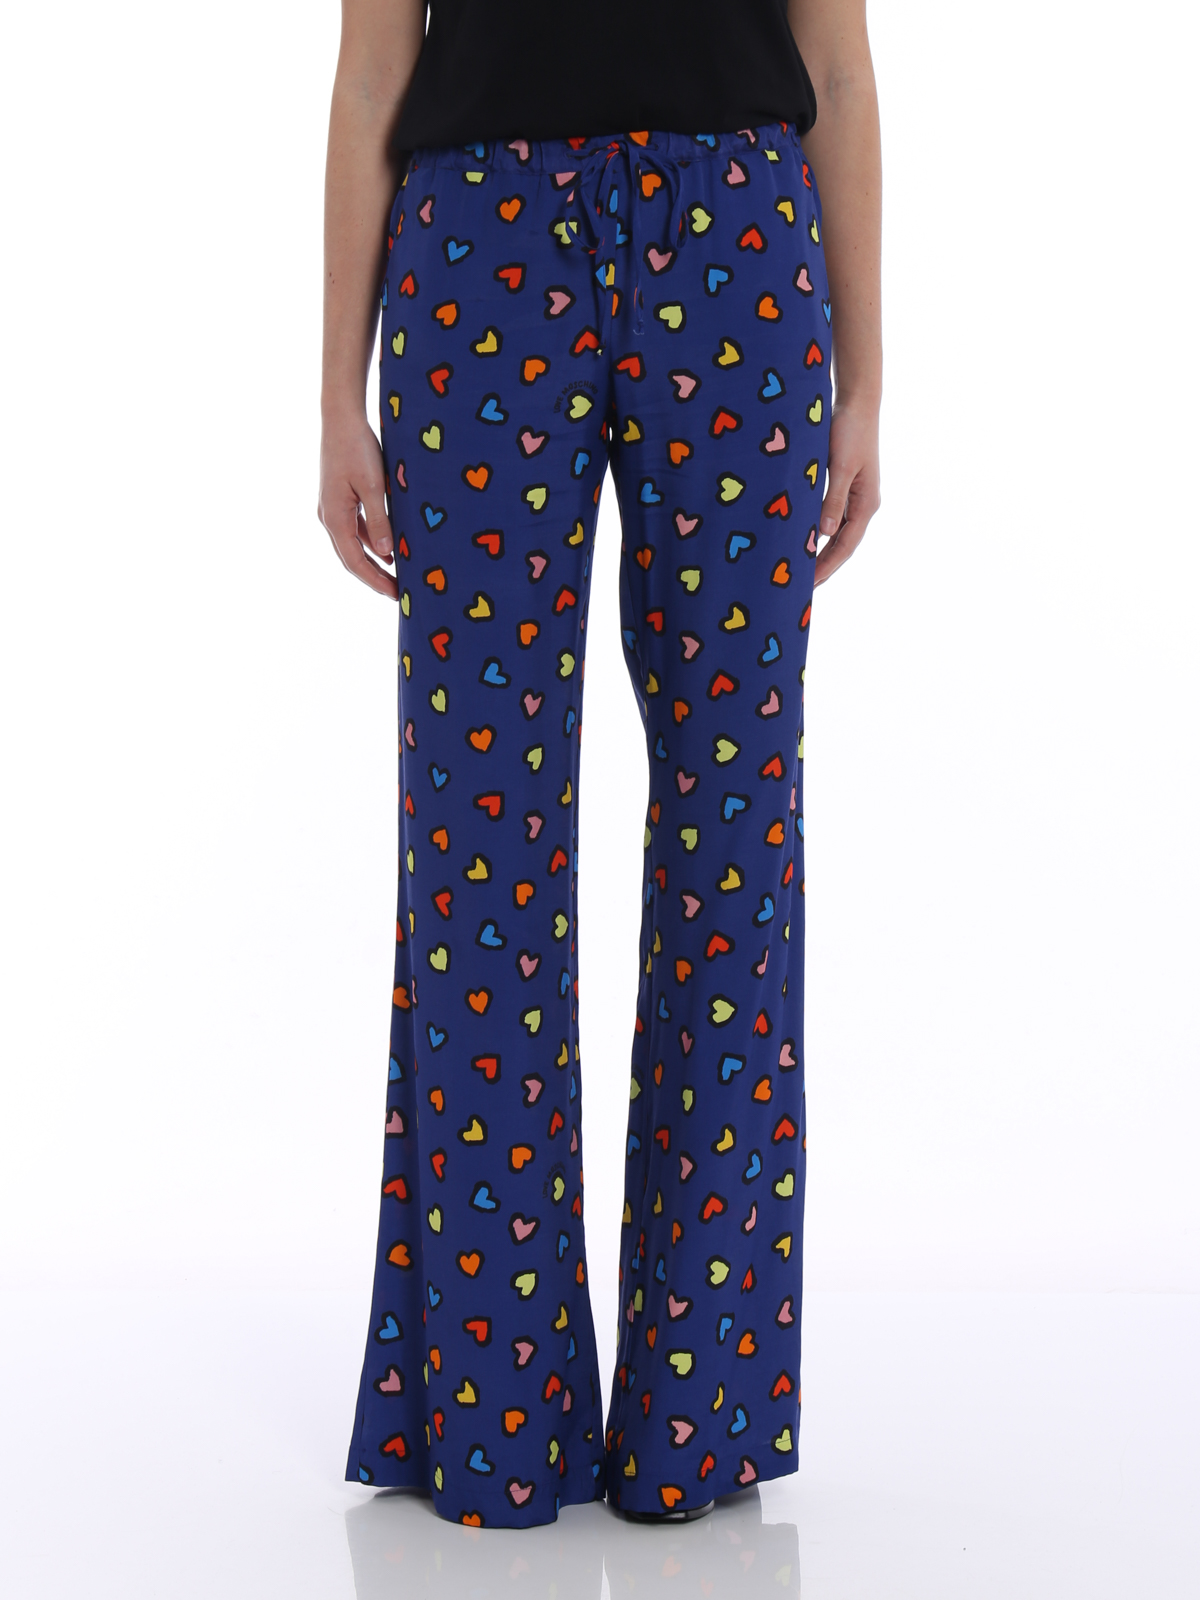 love moschino trousers